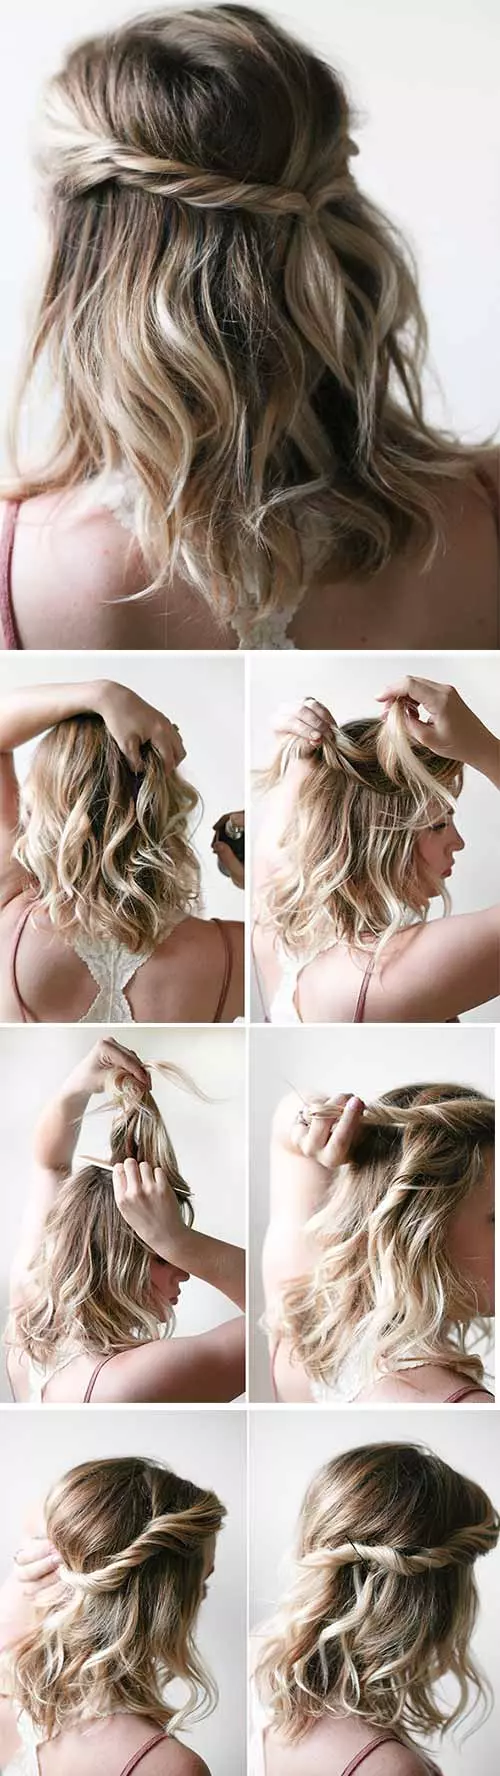 The easy twist diy short hairstyle